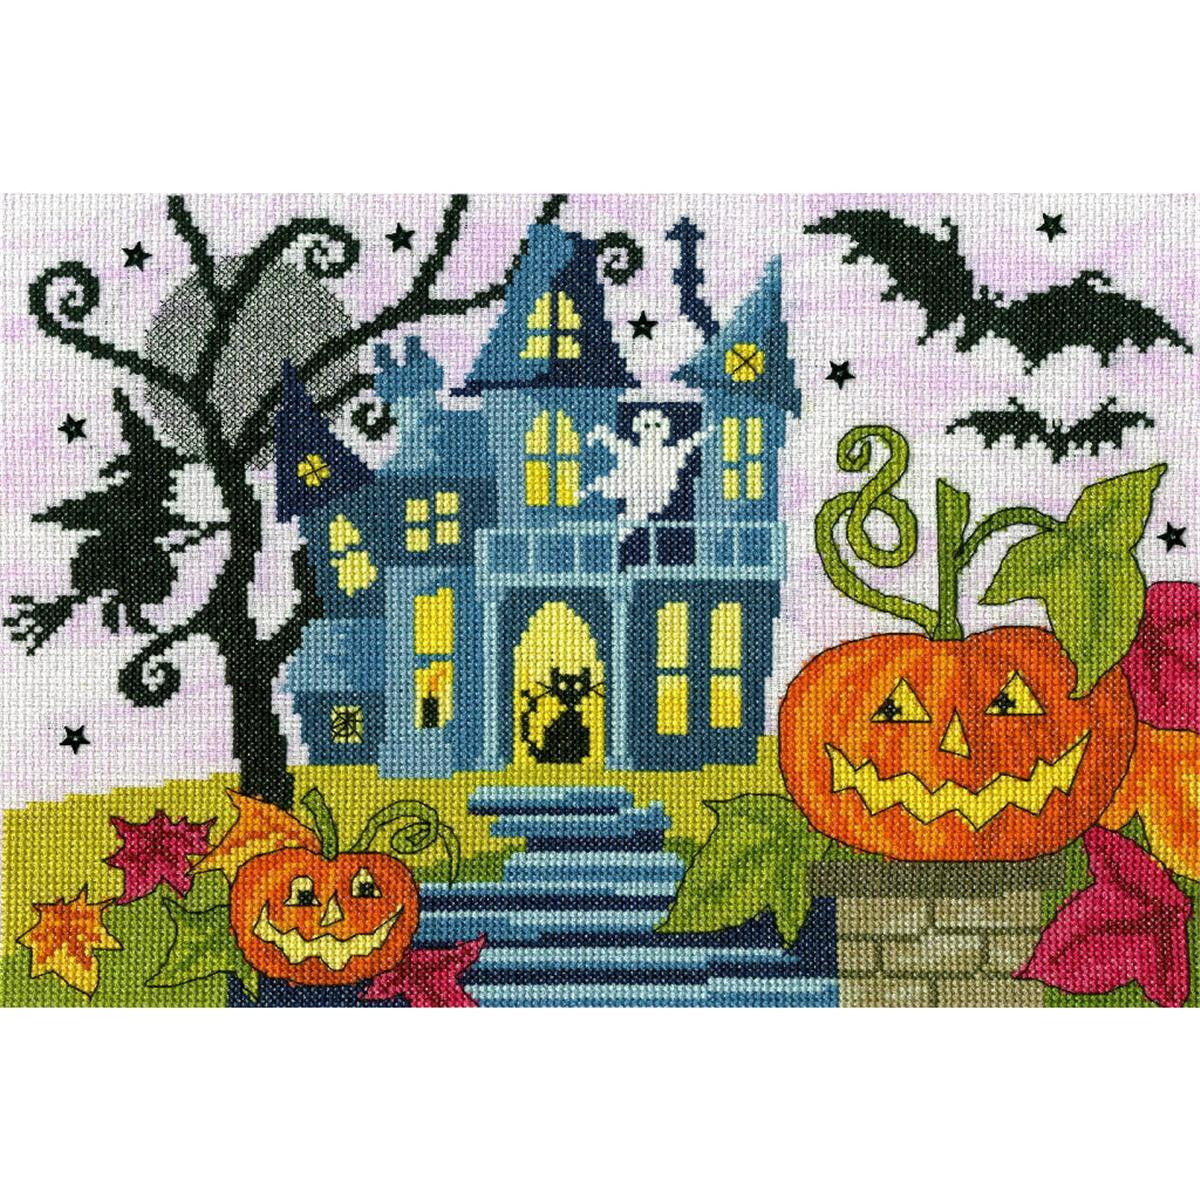 A colorful embroidery design features a spooky Halloween...